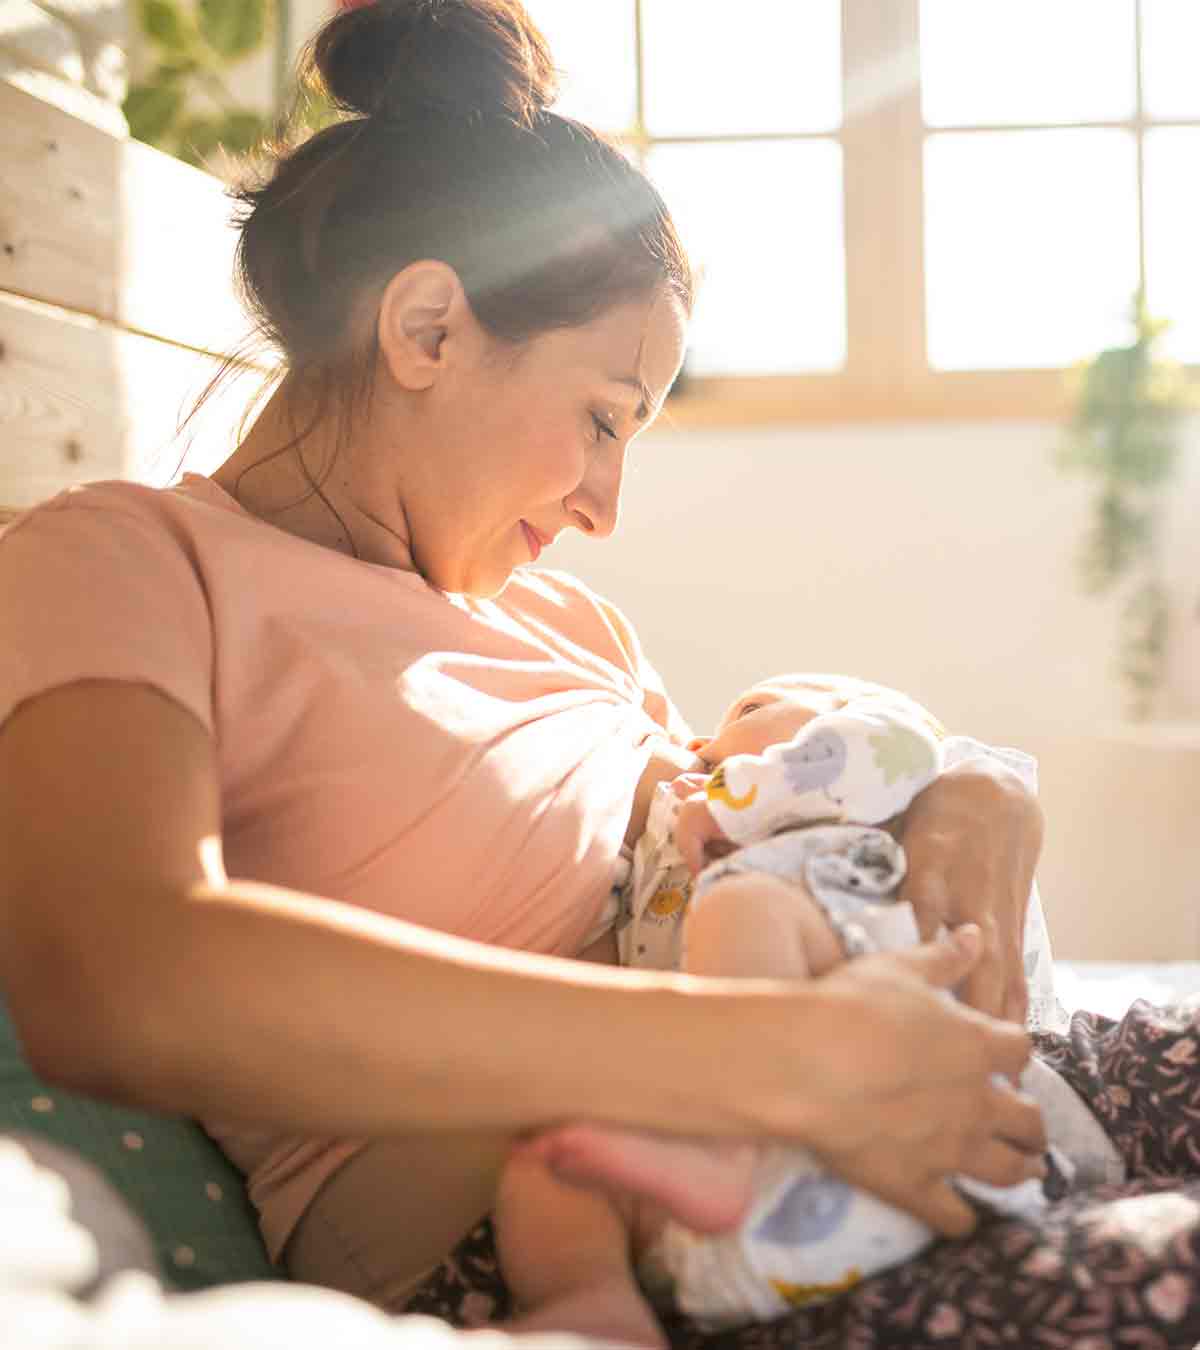 Is It Normal For Babies To Sweat While Breastfeeding?